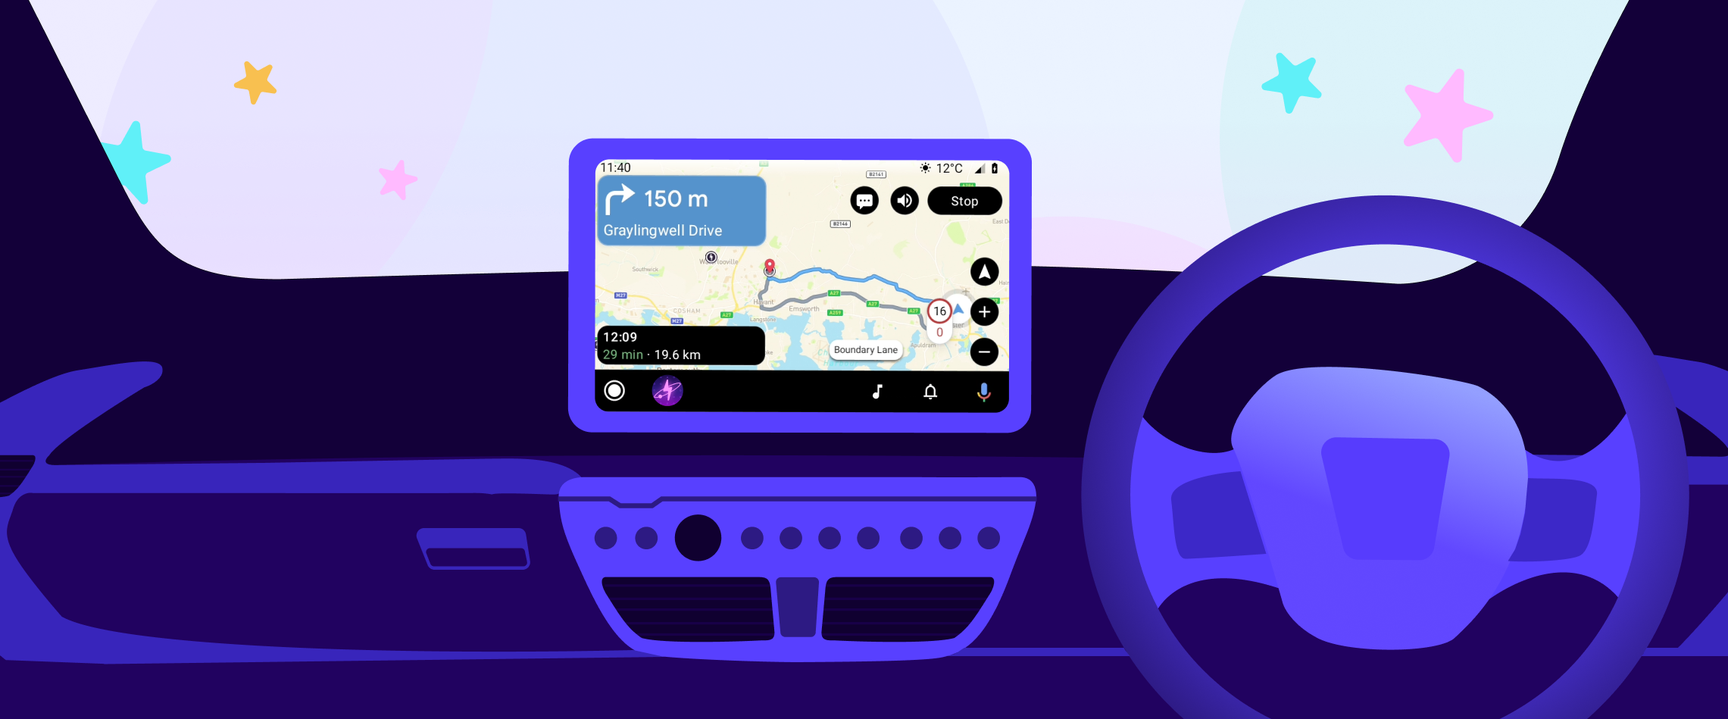 Graphic of an electric vehicle dashboard and the Electroverse car app